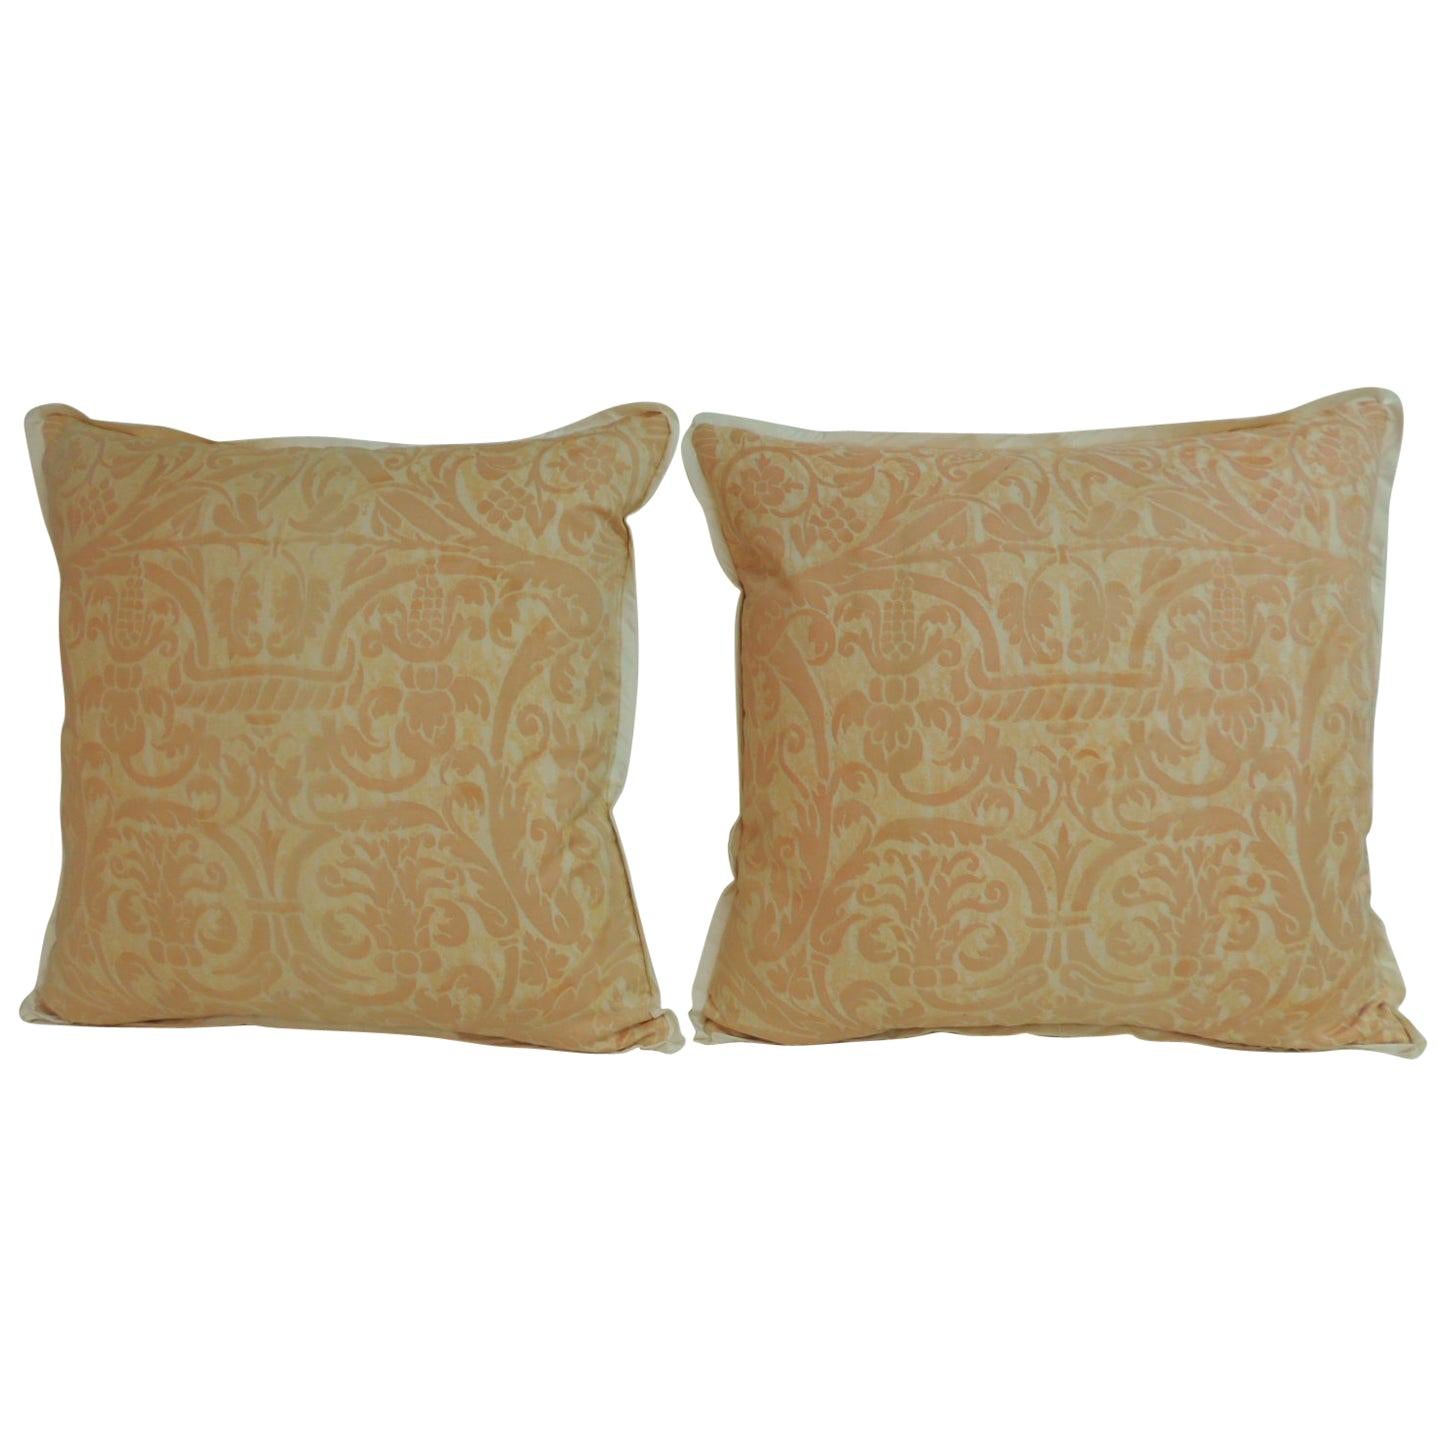 Pair of Peach Fortuny “Uccelli” Printed Vintage Decorative Pillows